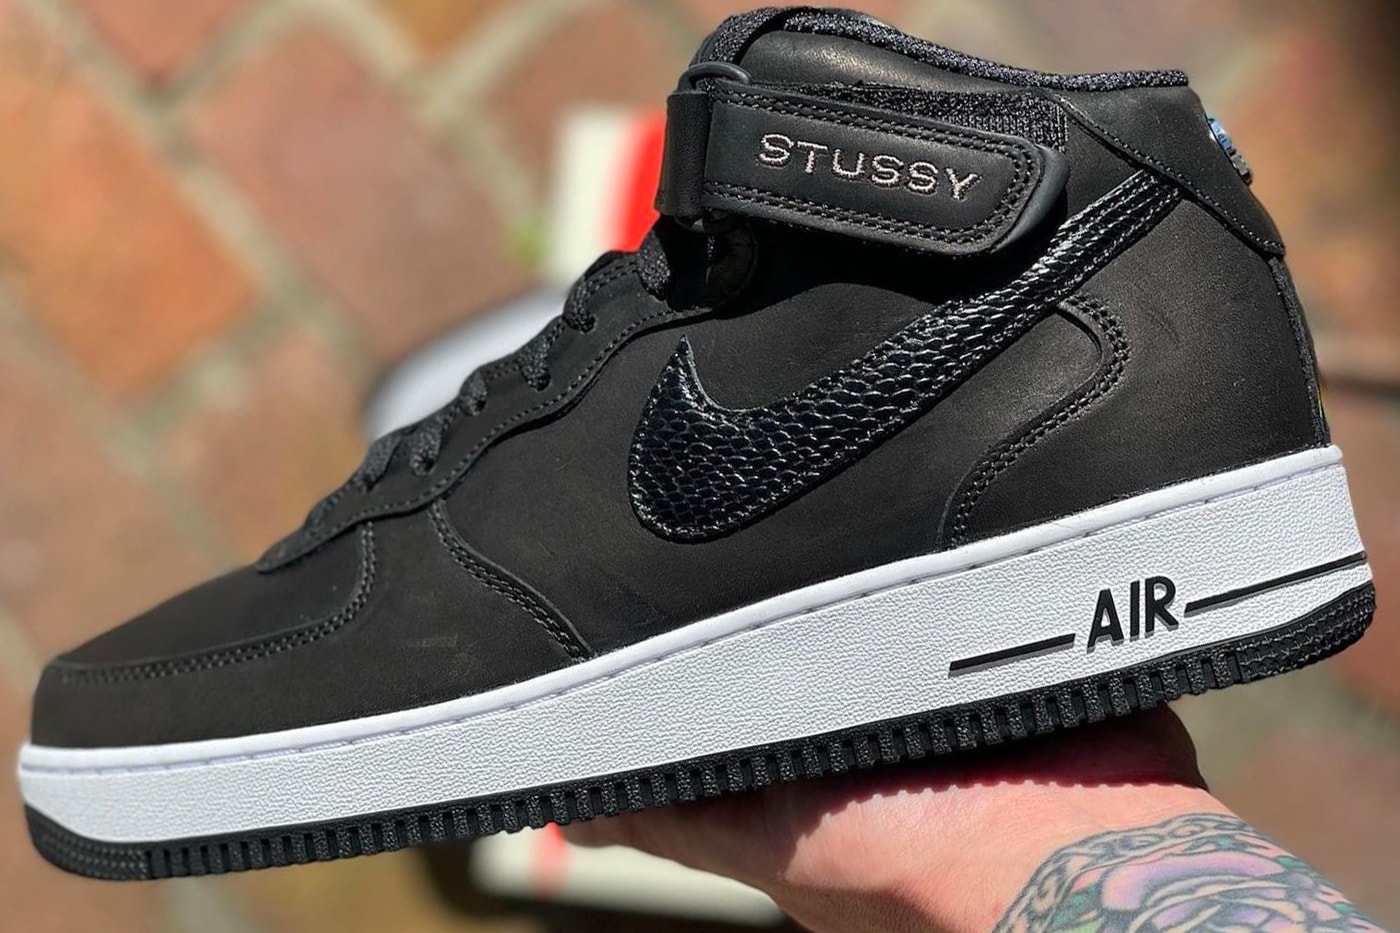 Stüssy x Nike Air Force 1 '07 Mid SP Black Another Look